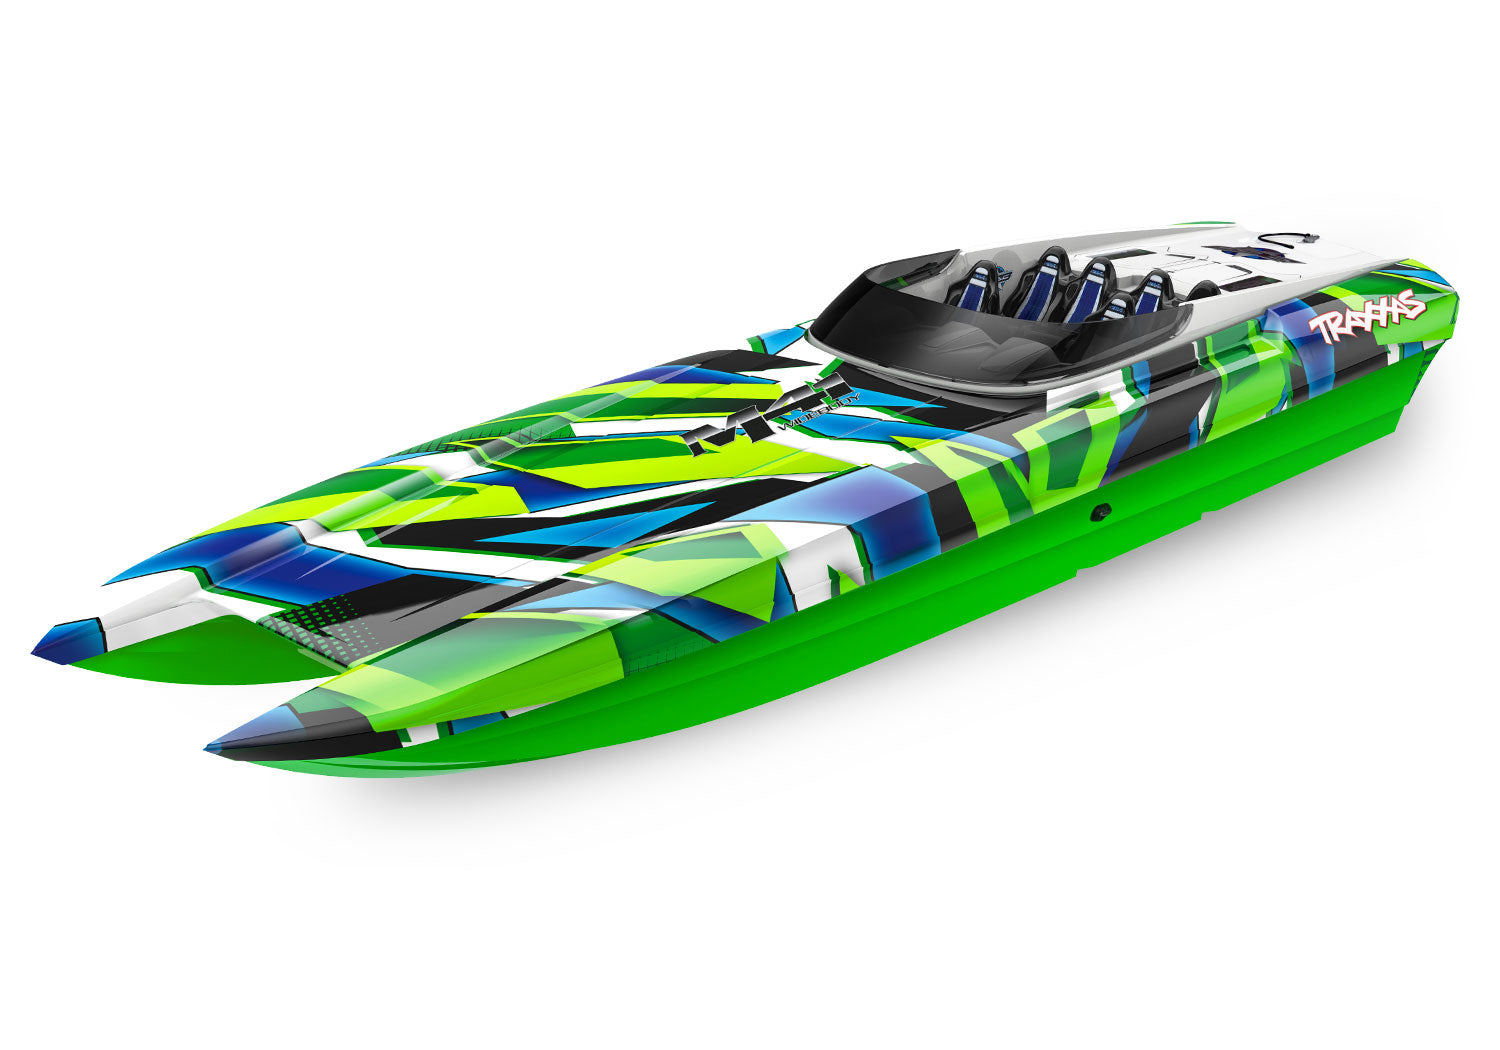 57046-4 DCB M41 Widebody RC Boat Green/Blue –, 59% OFF